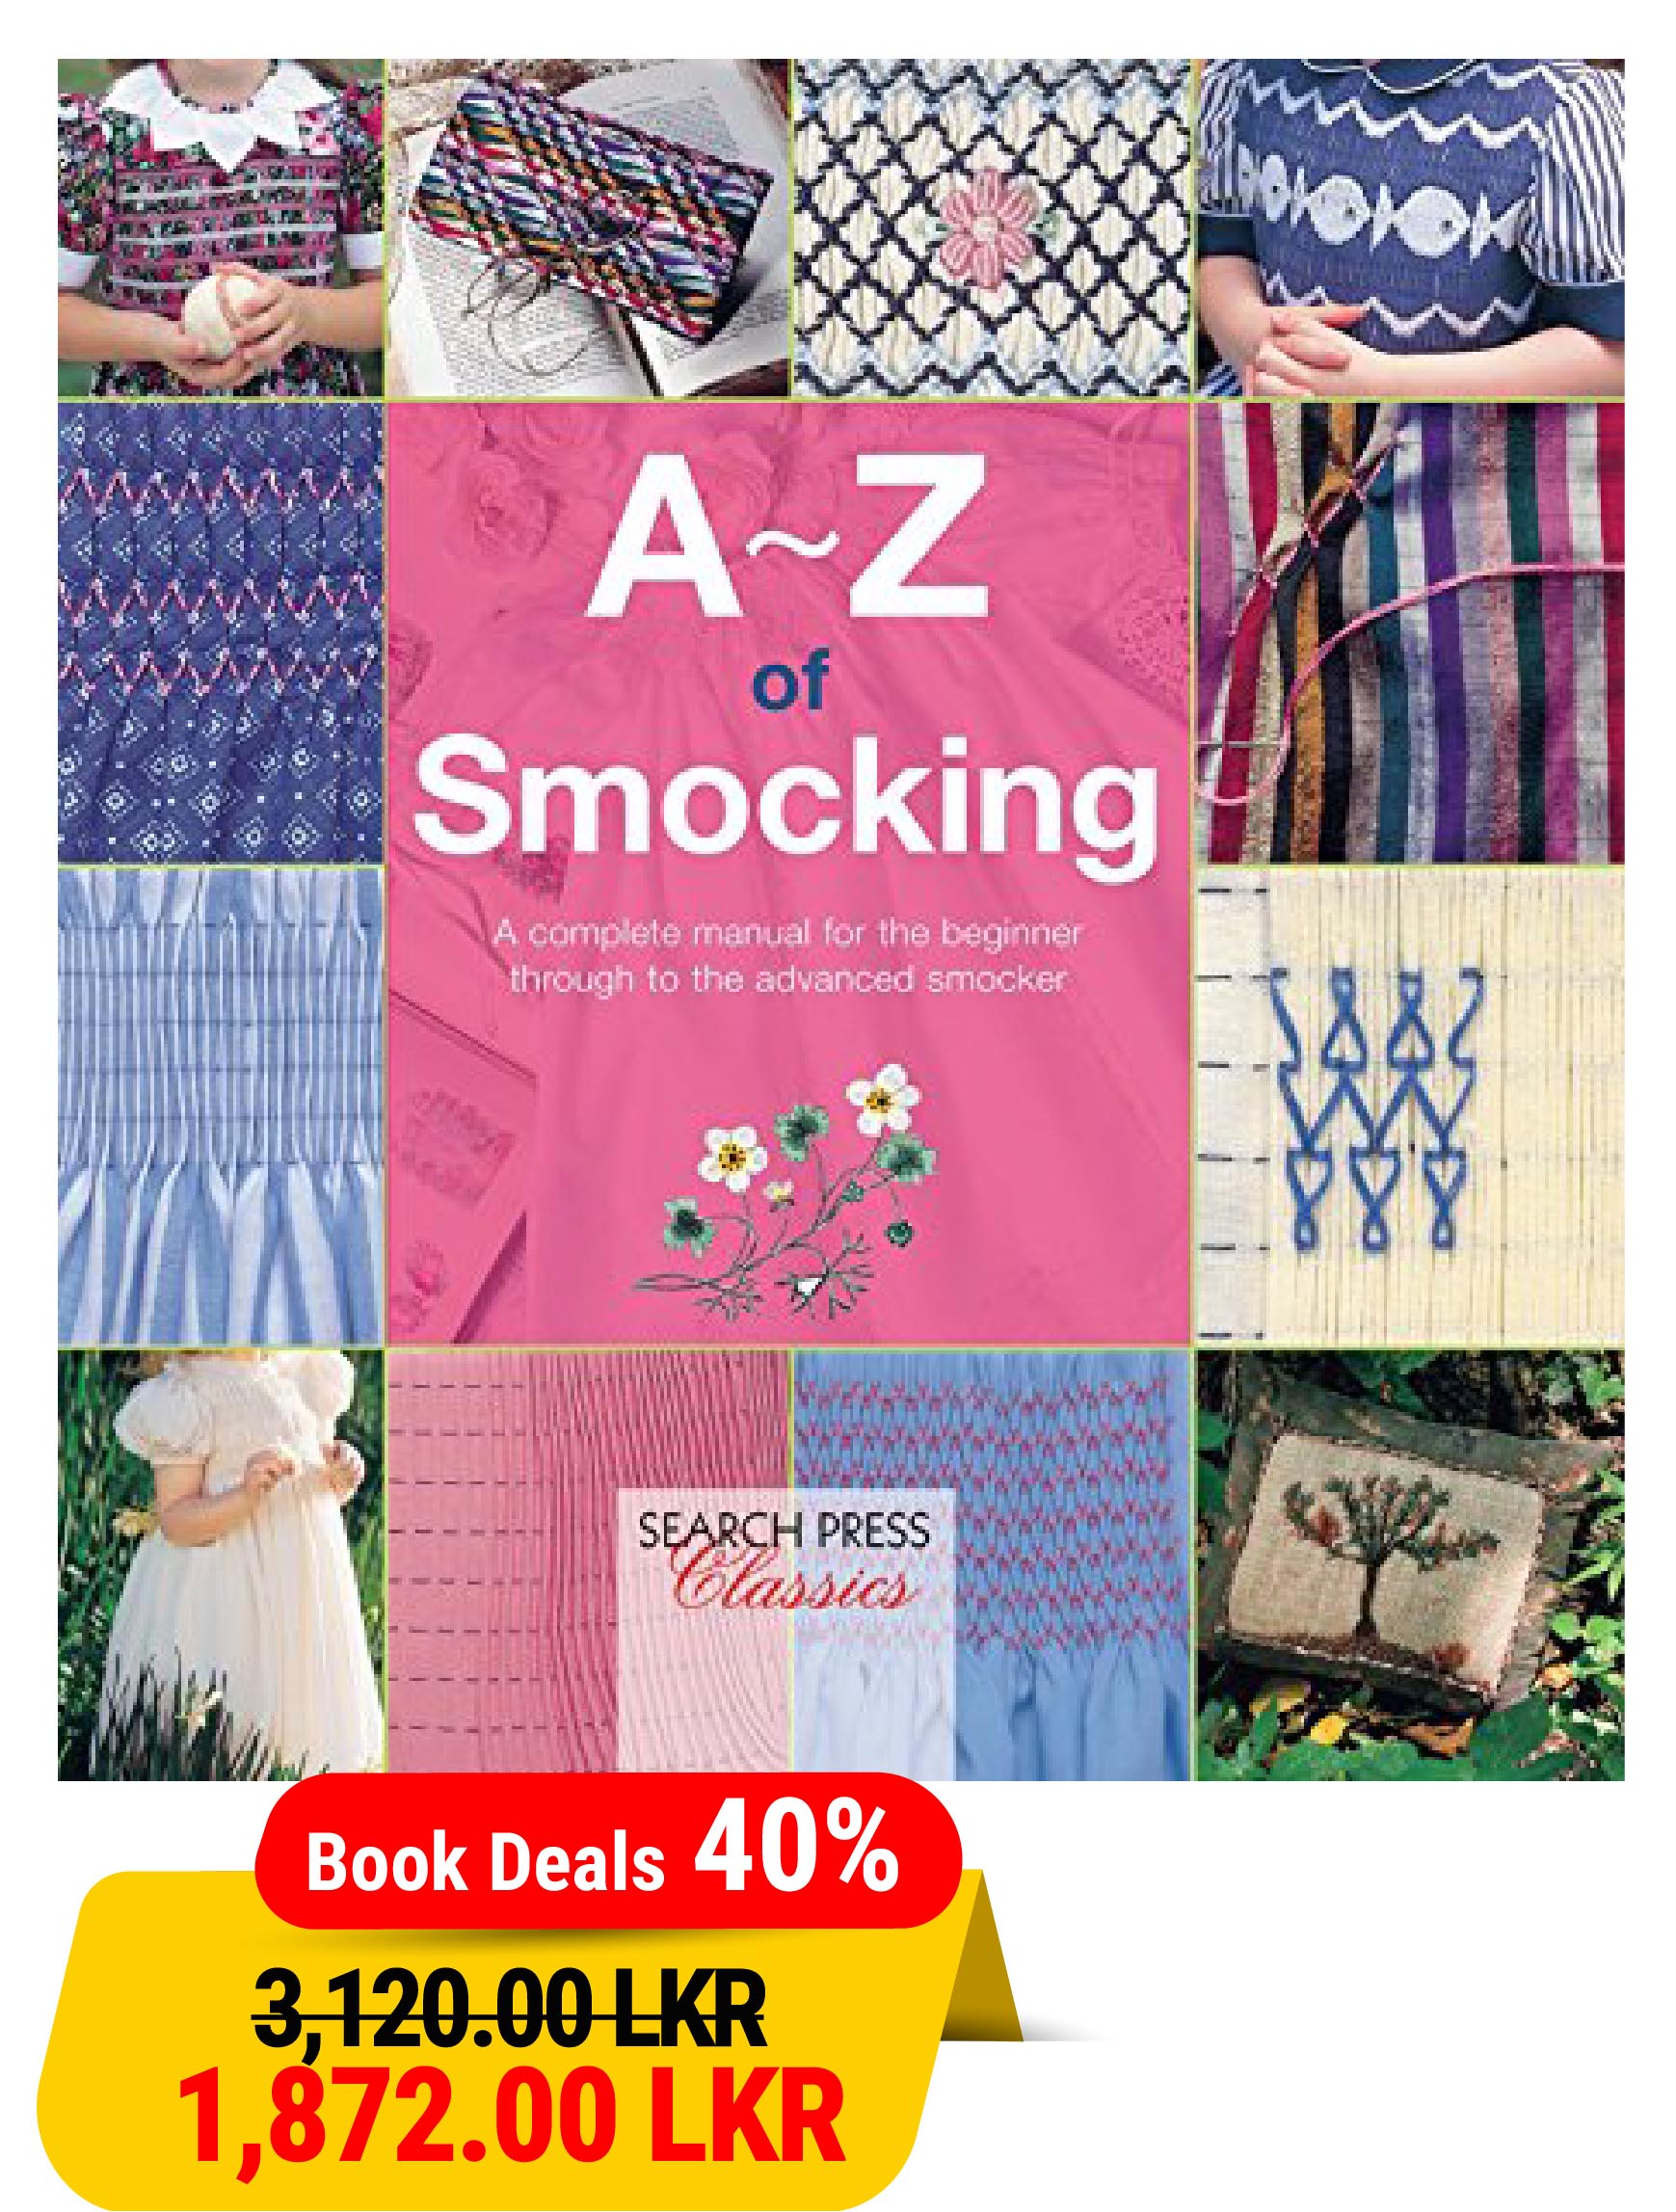 A-Z of Smocking: A Complete Manual for The Beginner Through to The Advanced Smocker